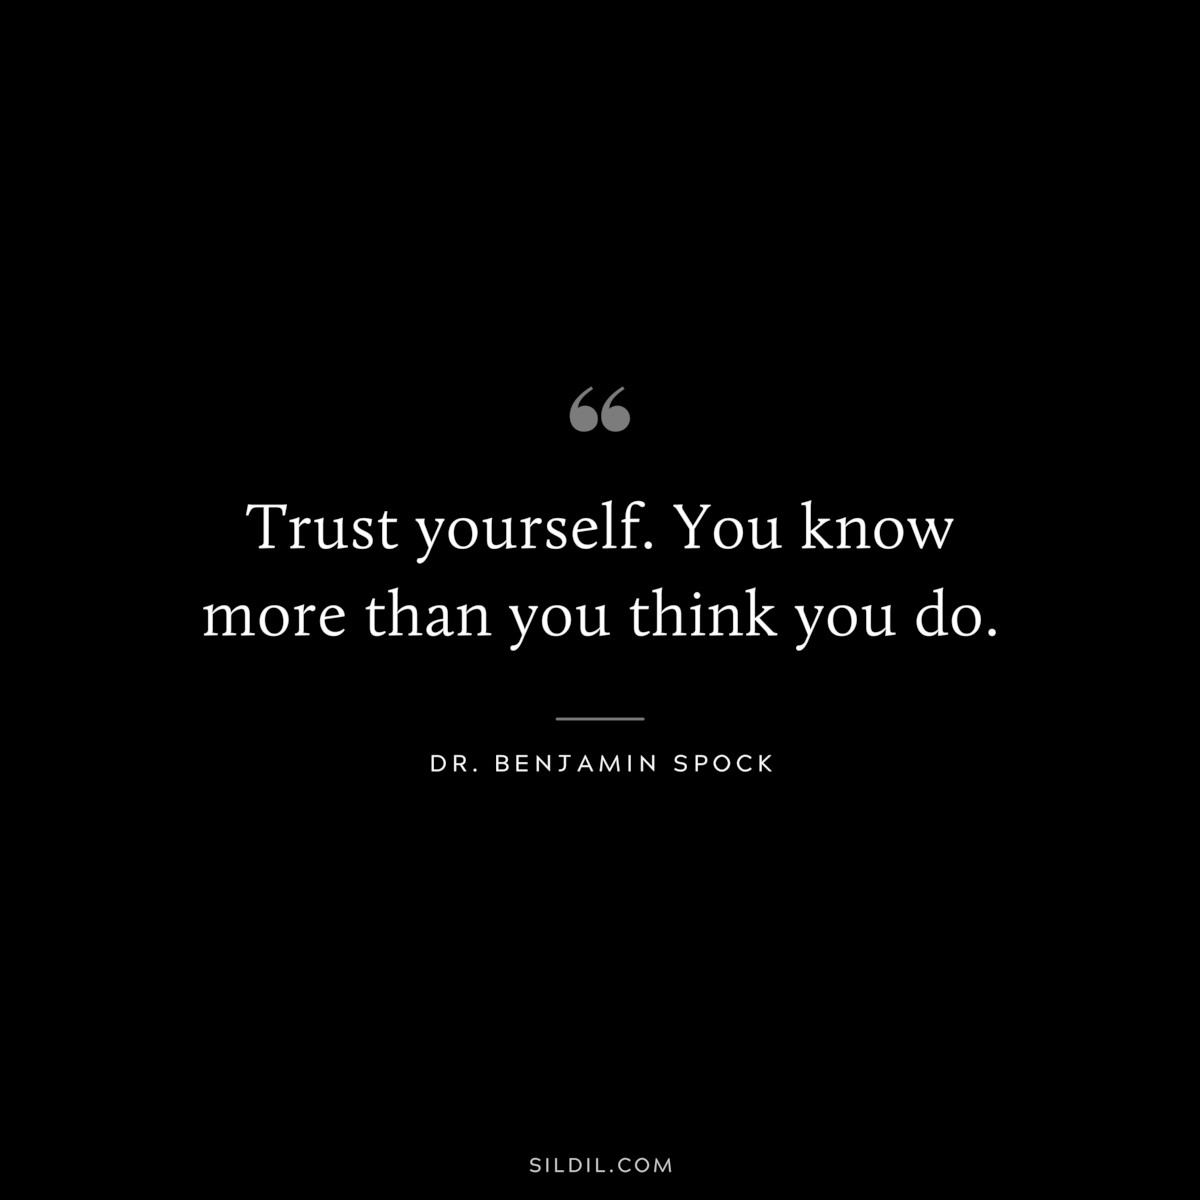 Trust yourself. You know more than you think you do. ― Dr. Benjamin Spock